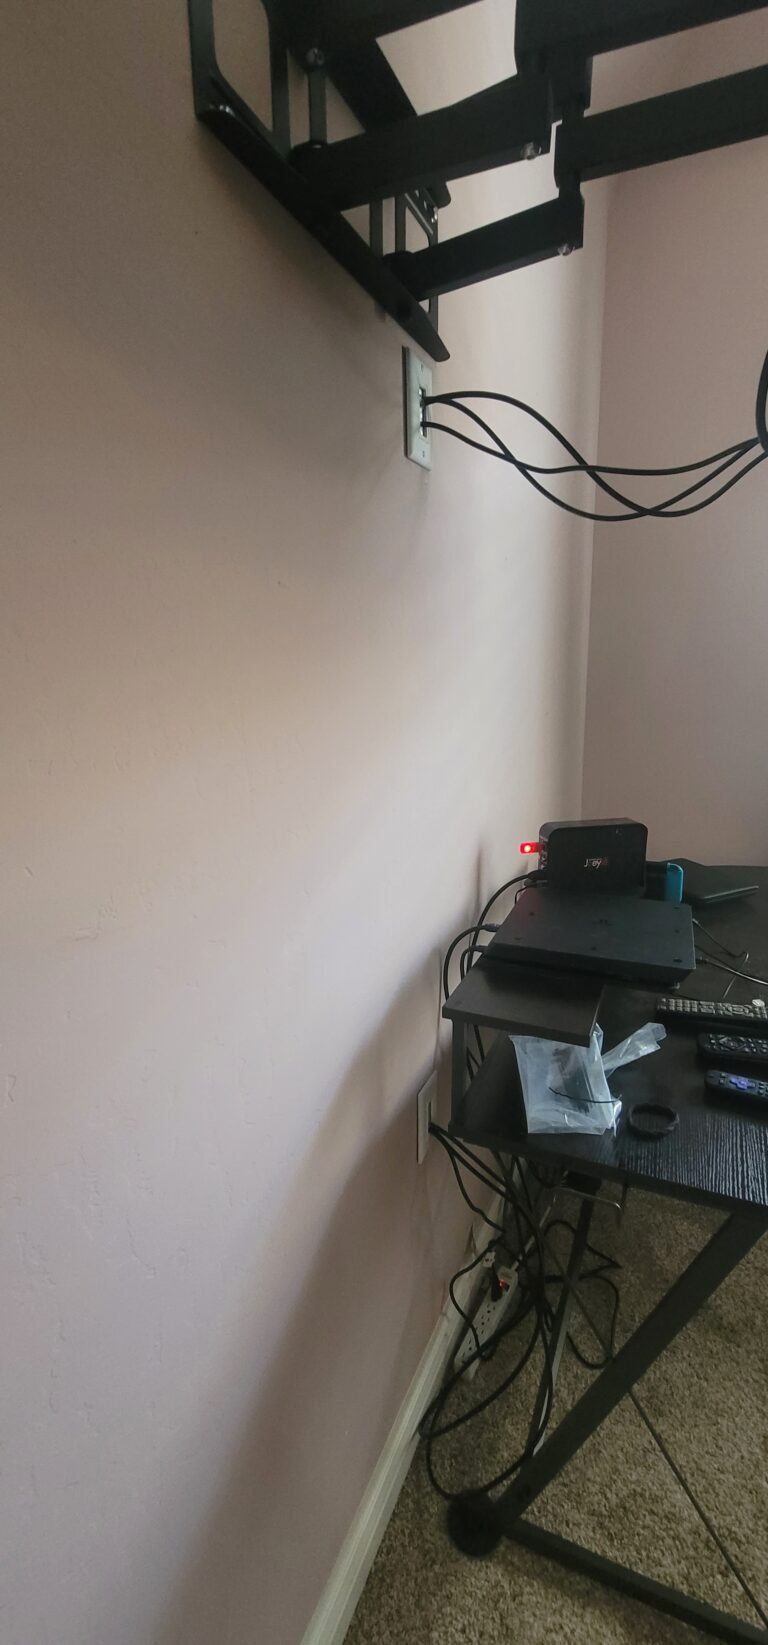 On this job, A4O ran the TV wires through the wall to give a clean look to our client's setup; with enough slack to allow the TV to have full range motion on the articulating mount used. TV Mounting Service. Kern County, Bakersfield, CA, USA.